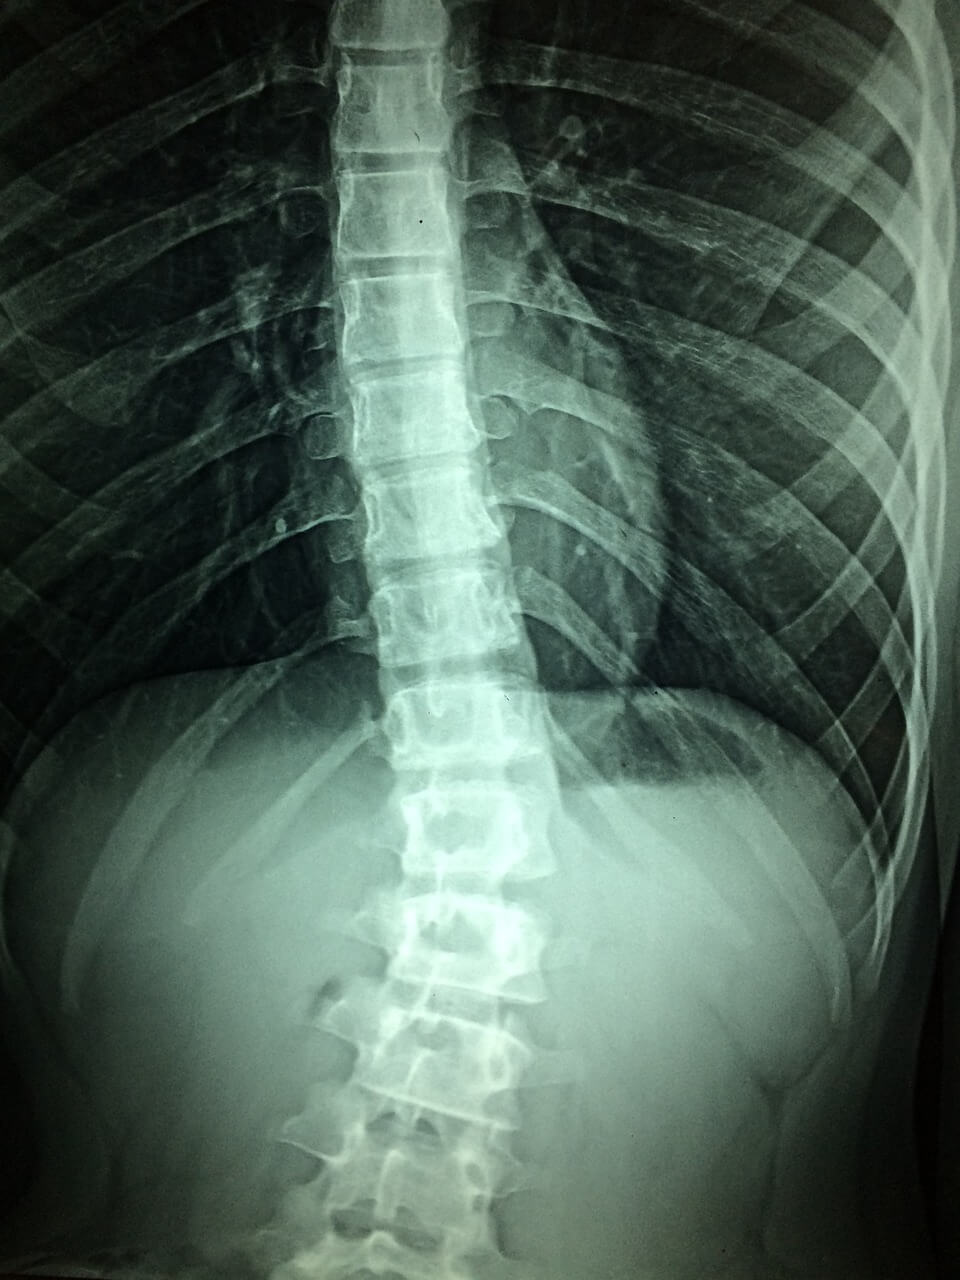 spinal-cord-photo